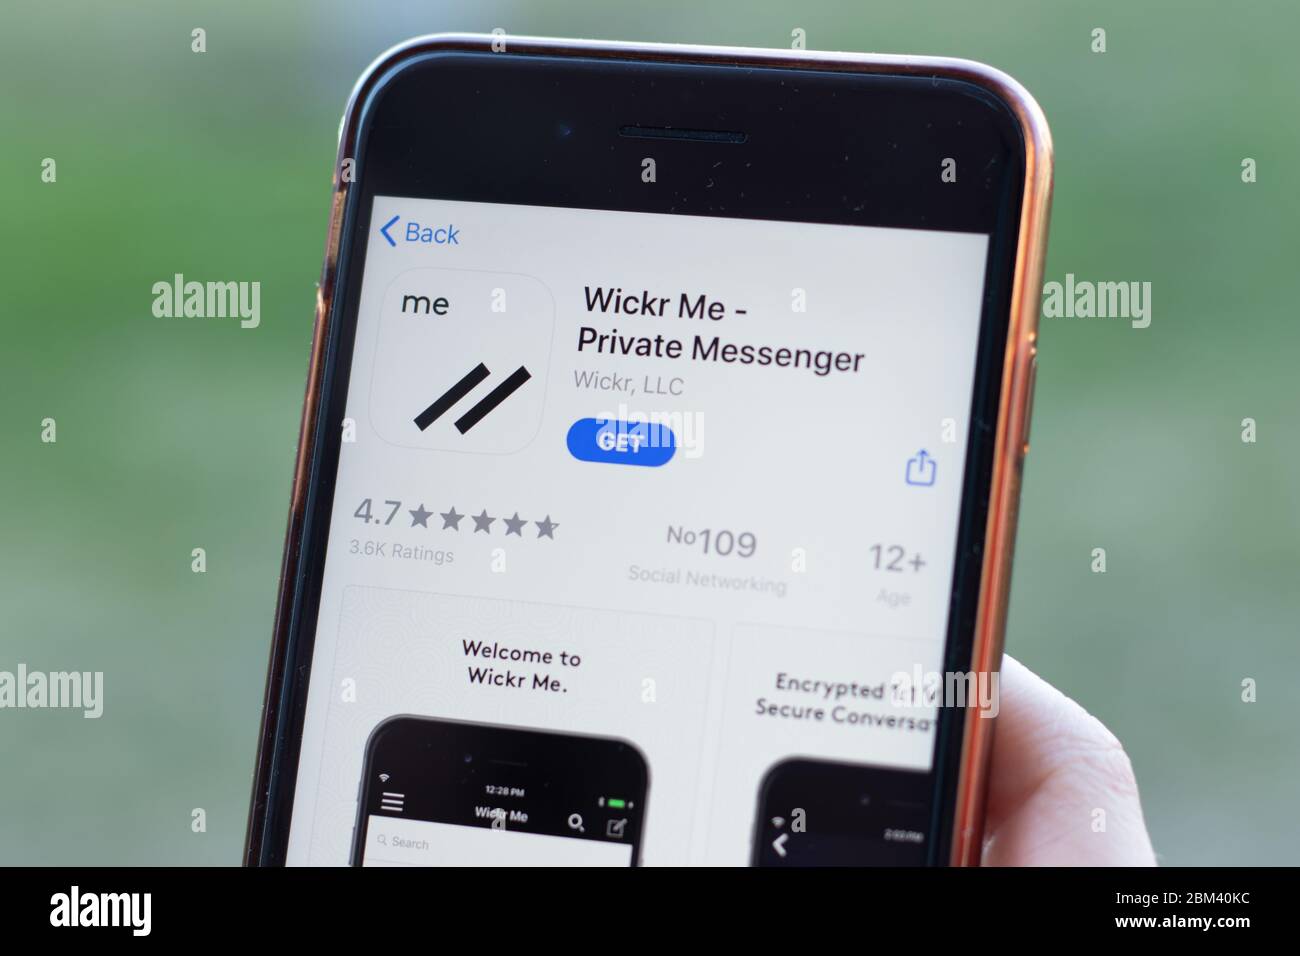 New York, USA - 1 May 2020: Wickr Me app logo close-up on phone screen, Illustrative Editorial Stock Photo